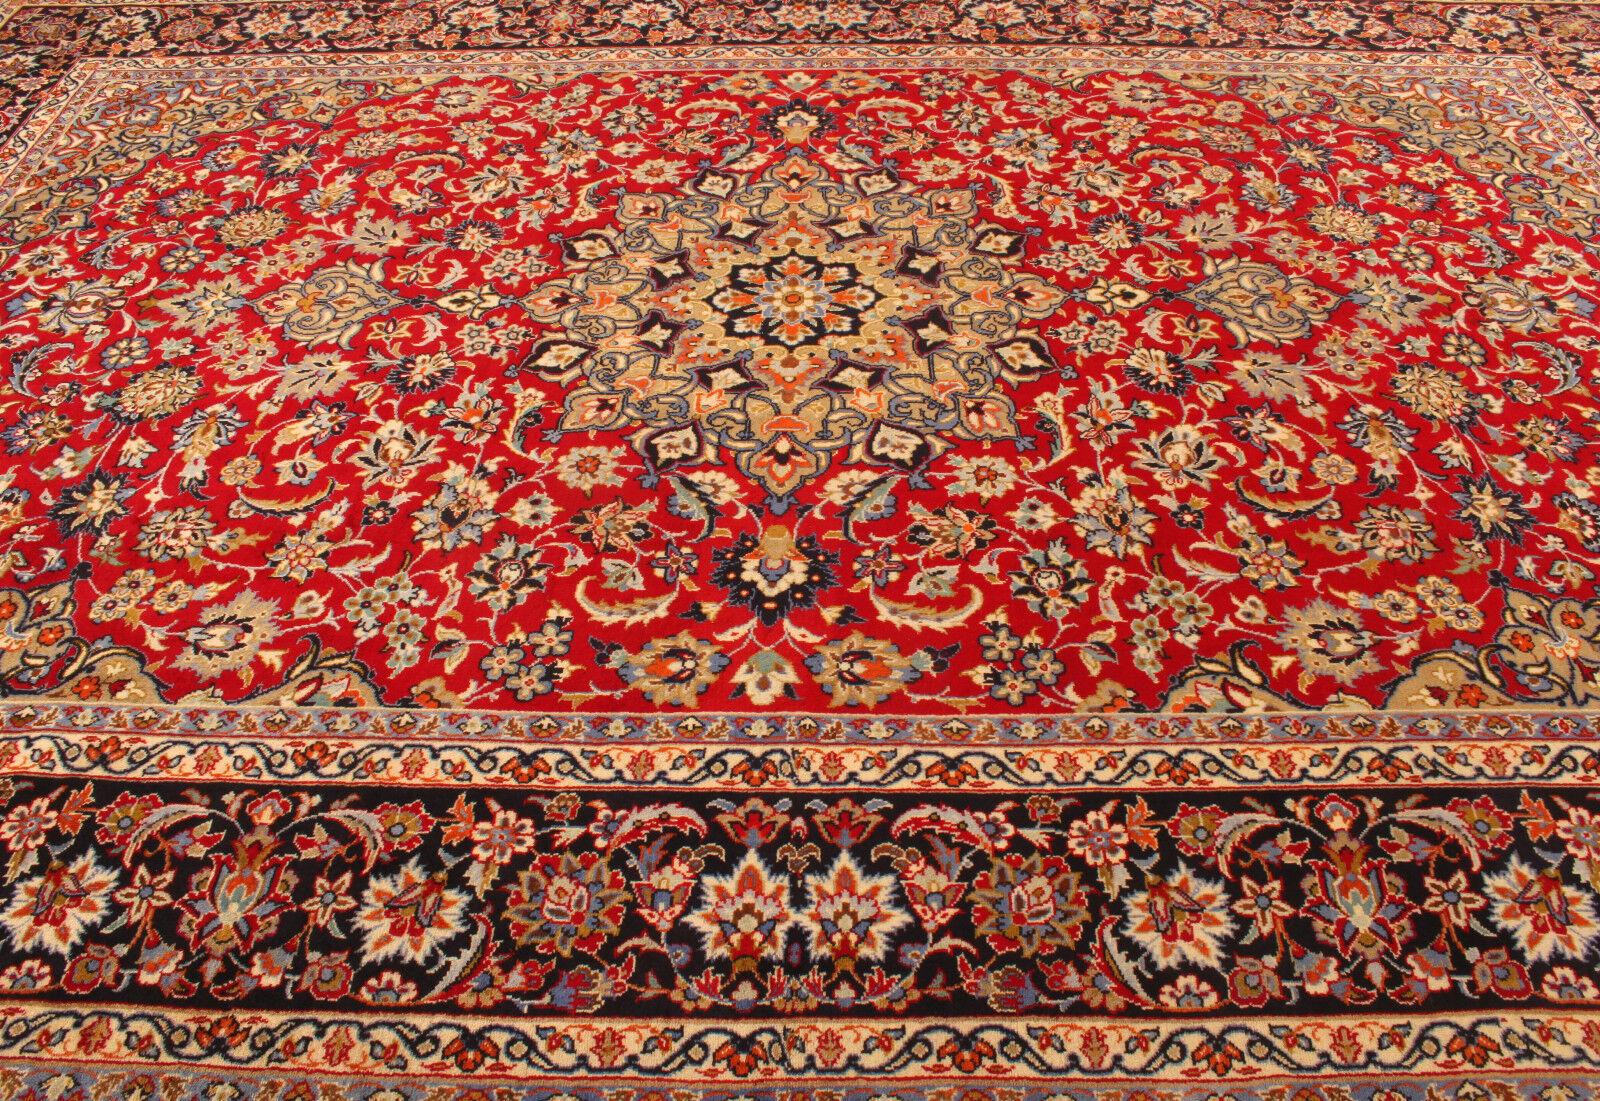 Handmade Vintage Persian Style Kashan Rug 9.6' x 14.1', 1960s - 1T15 For Sale 2